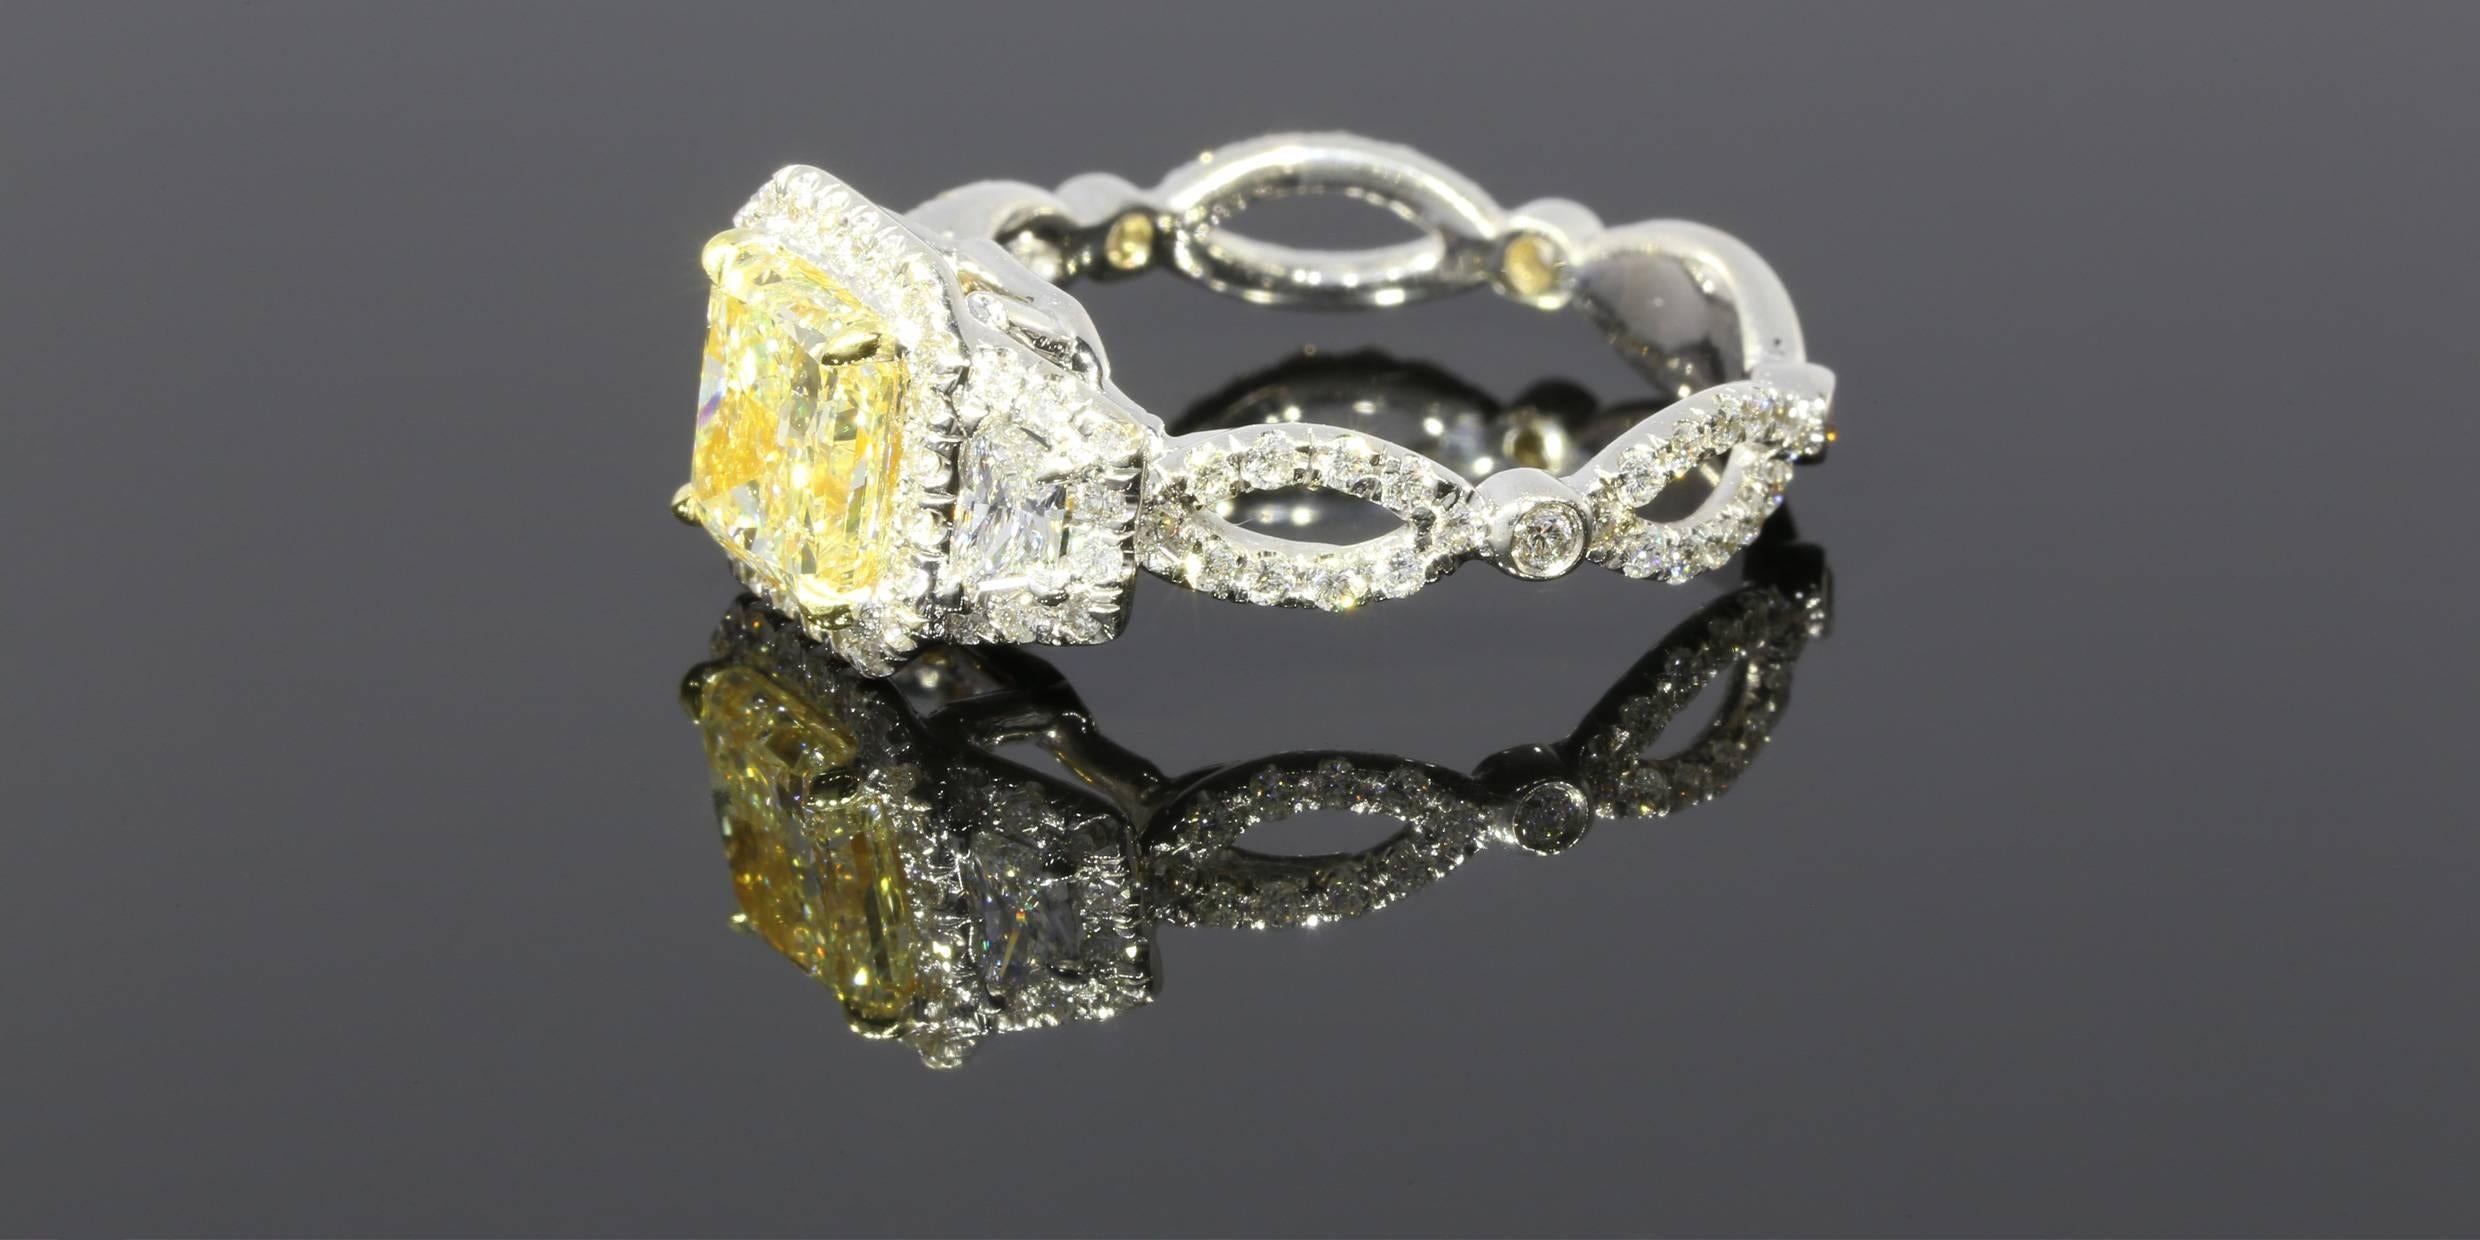 This engagement ring is one of a kind! It features a fancy light yellow radiant shaped center diamond with a total carat weight of 1.57CT and a clarity of SI1. It is flanked by two trapezoid shaped side diamonds. Both the center diamond and the